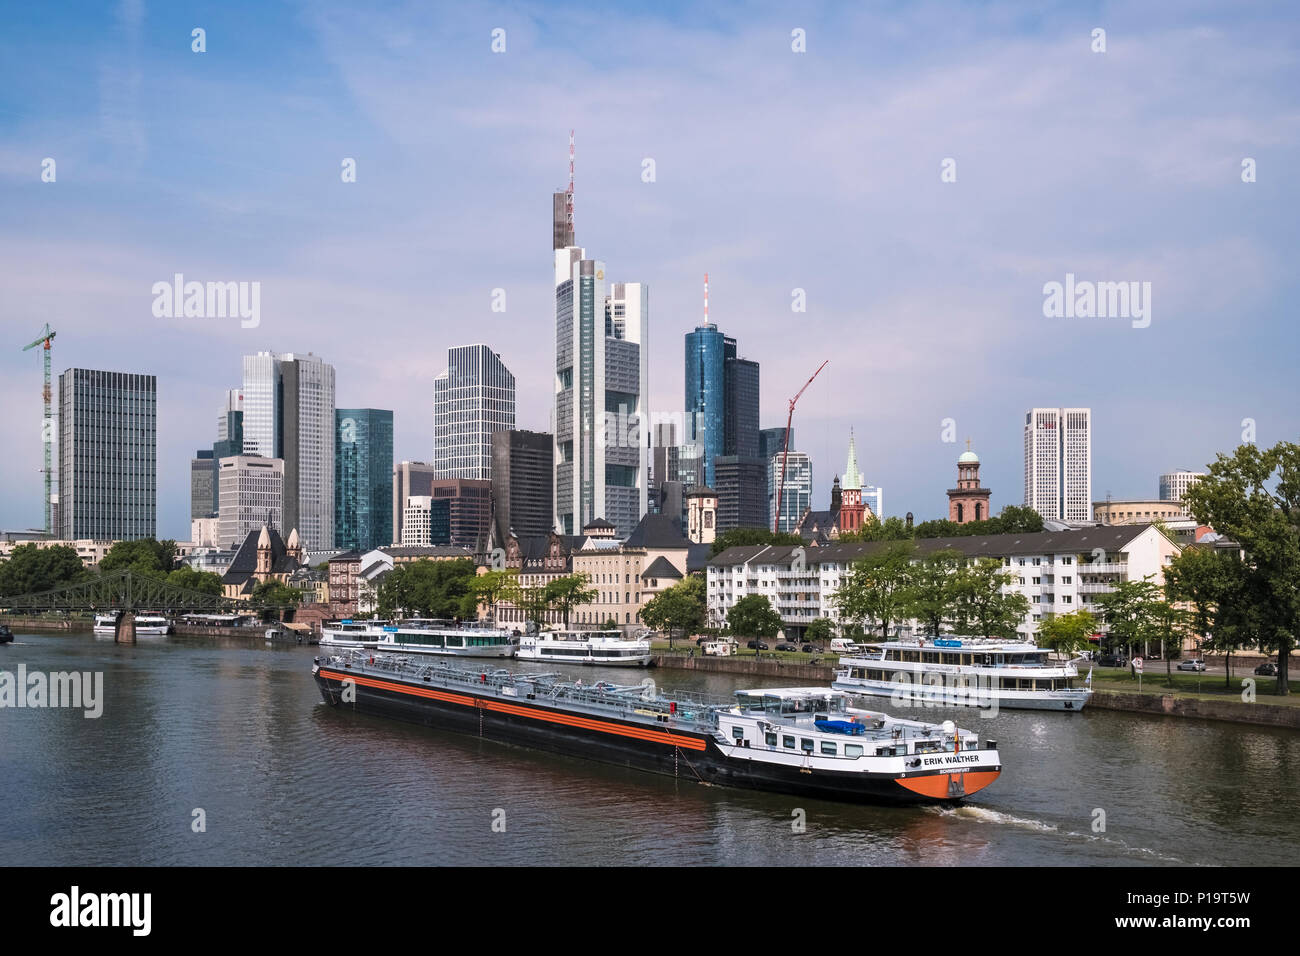 A large barge travels on the river Main, past the citys modern architecture skyscraper skyline, Frankfurt am Main, Hesse, Germany Stock Photo